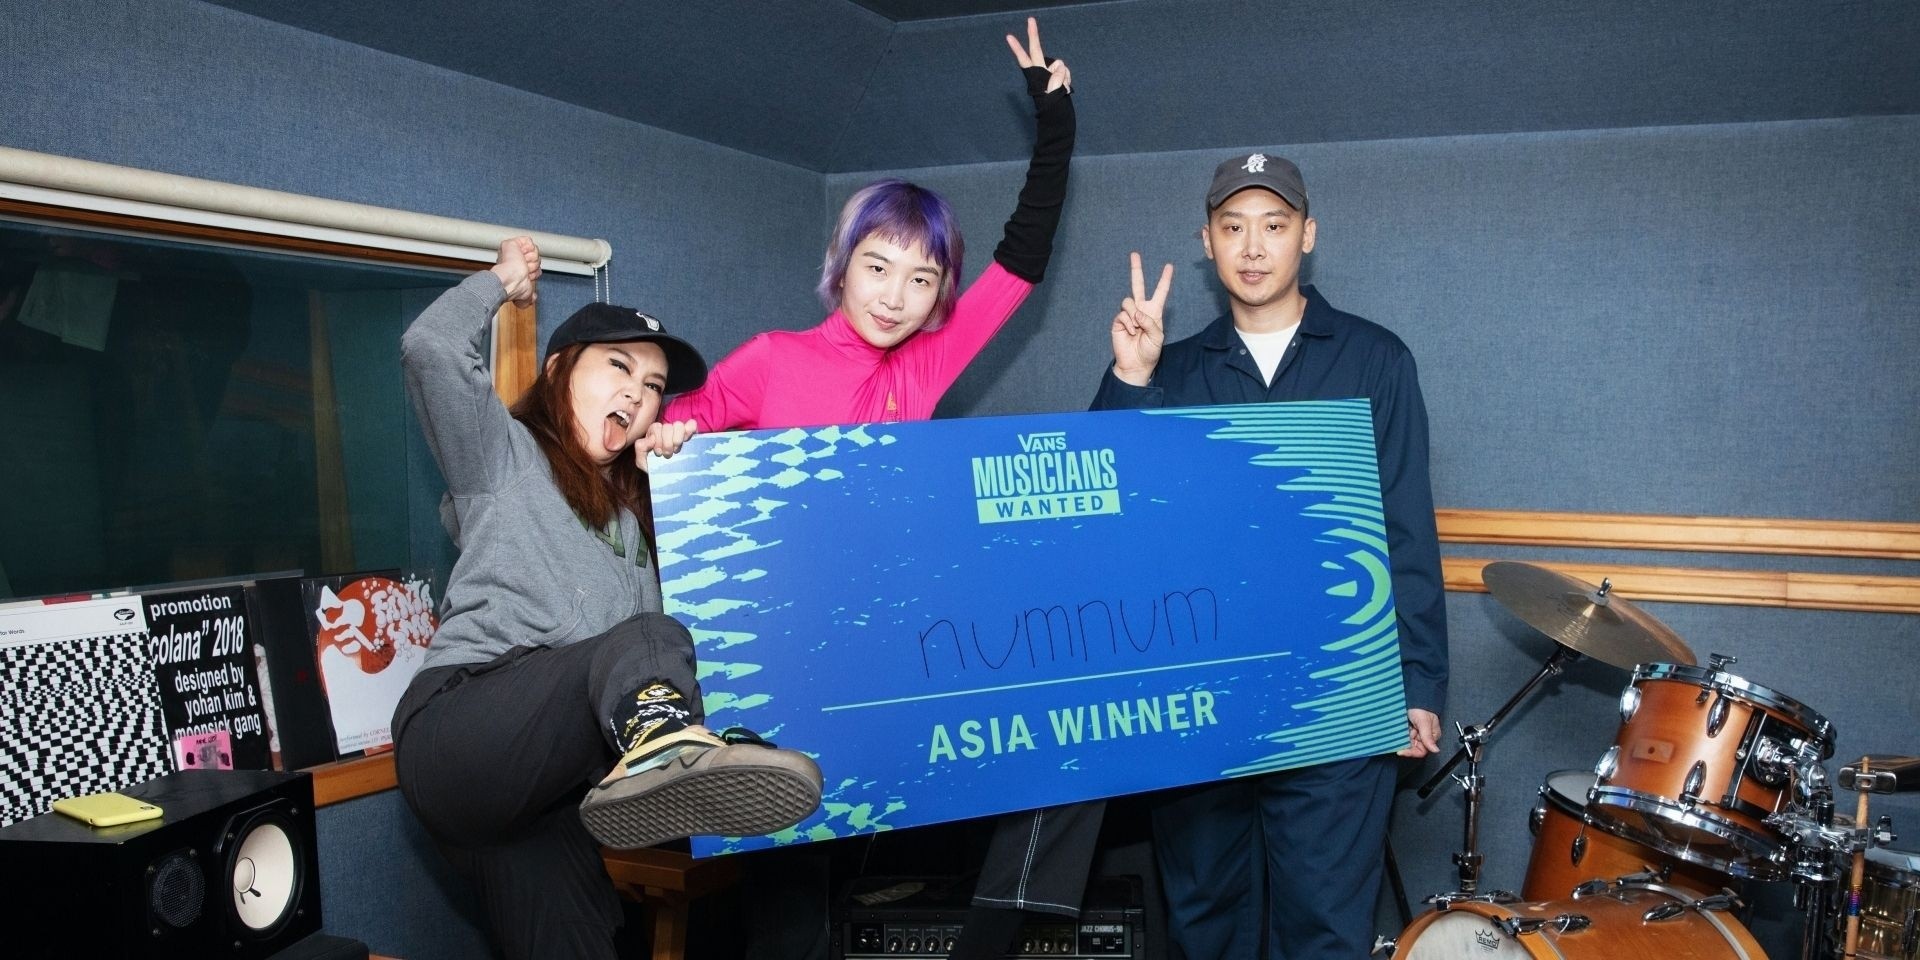 Vans Musicians Wanted crowns Korean band numnum as the Asia-Pacific Winner 